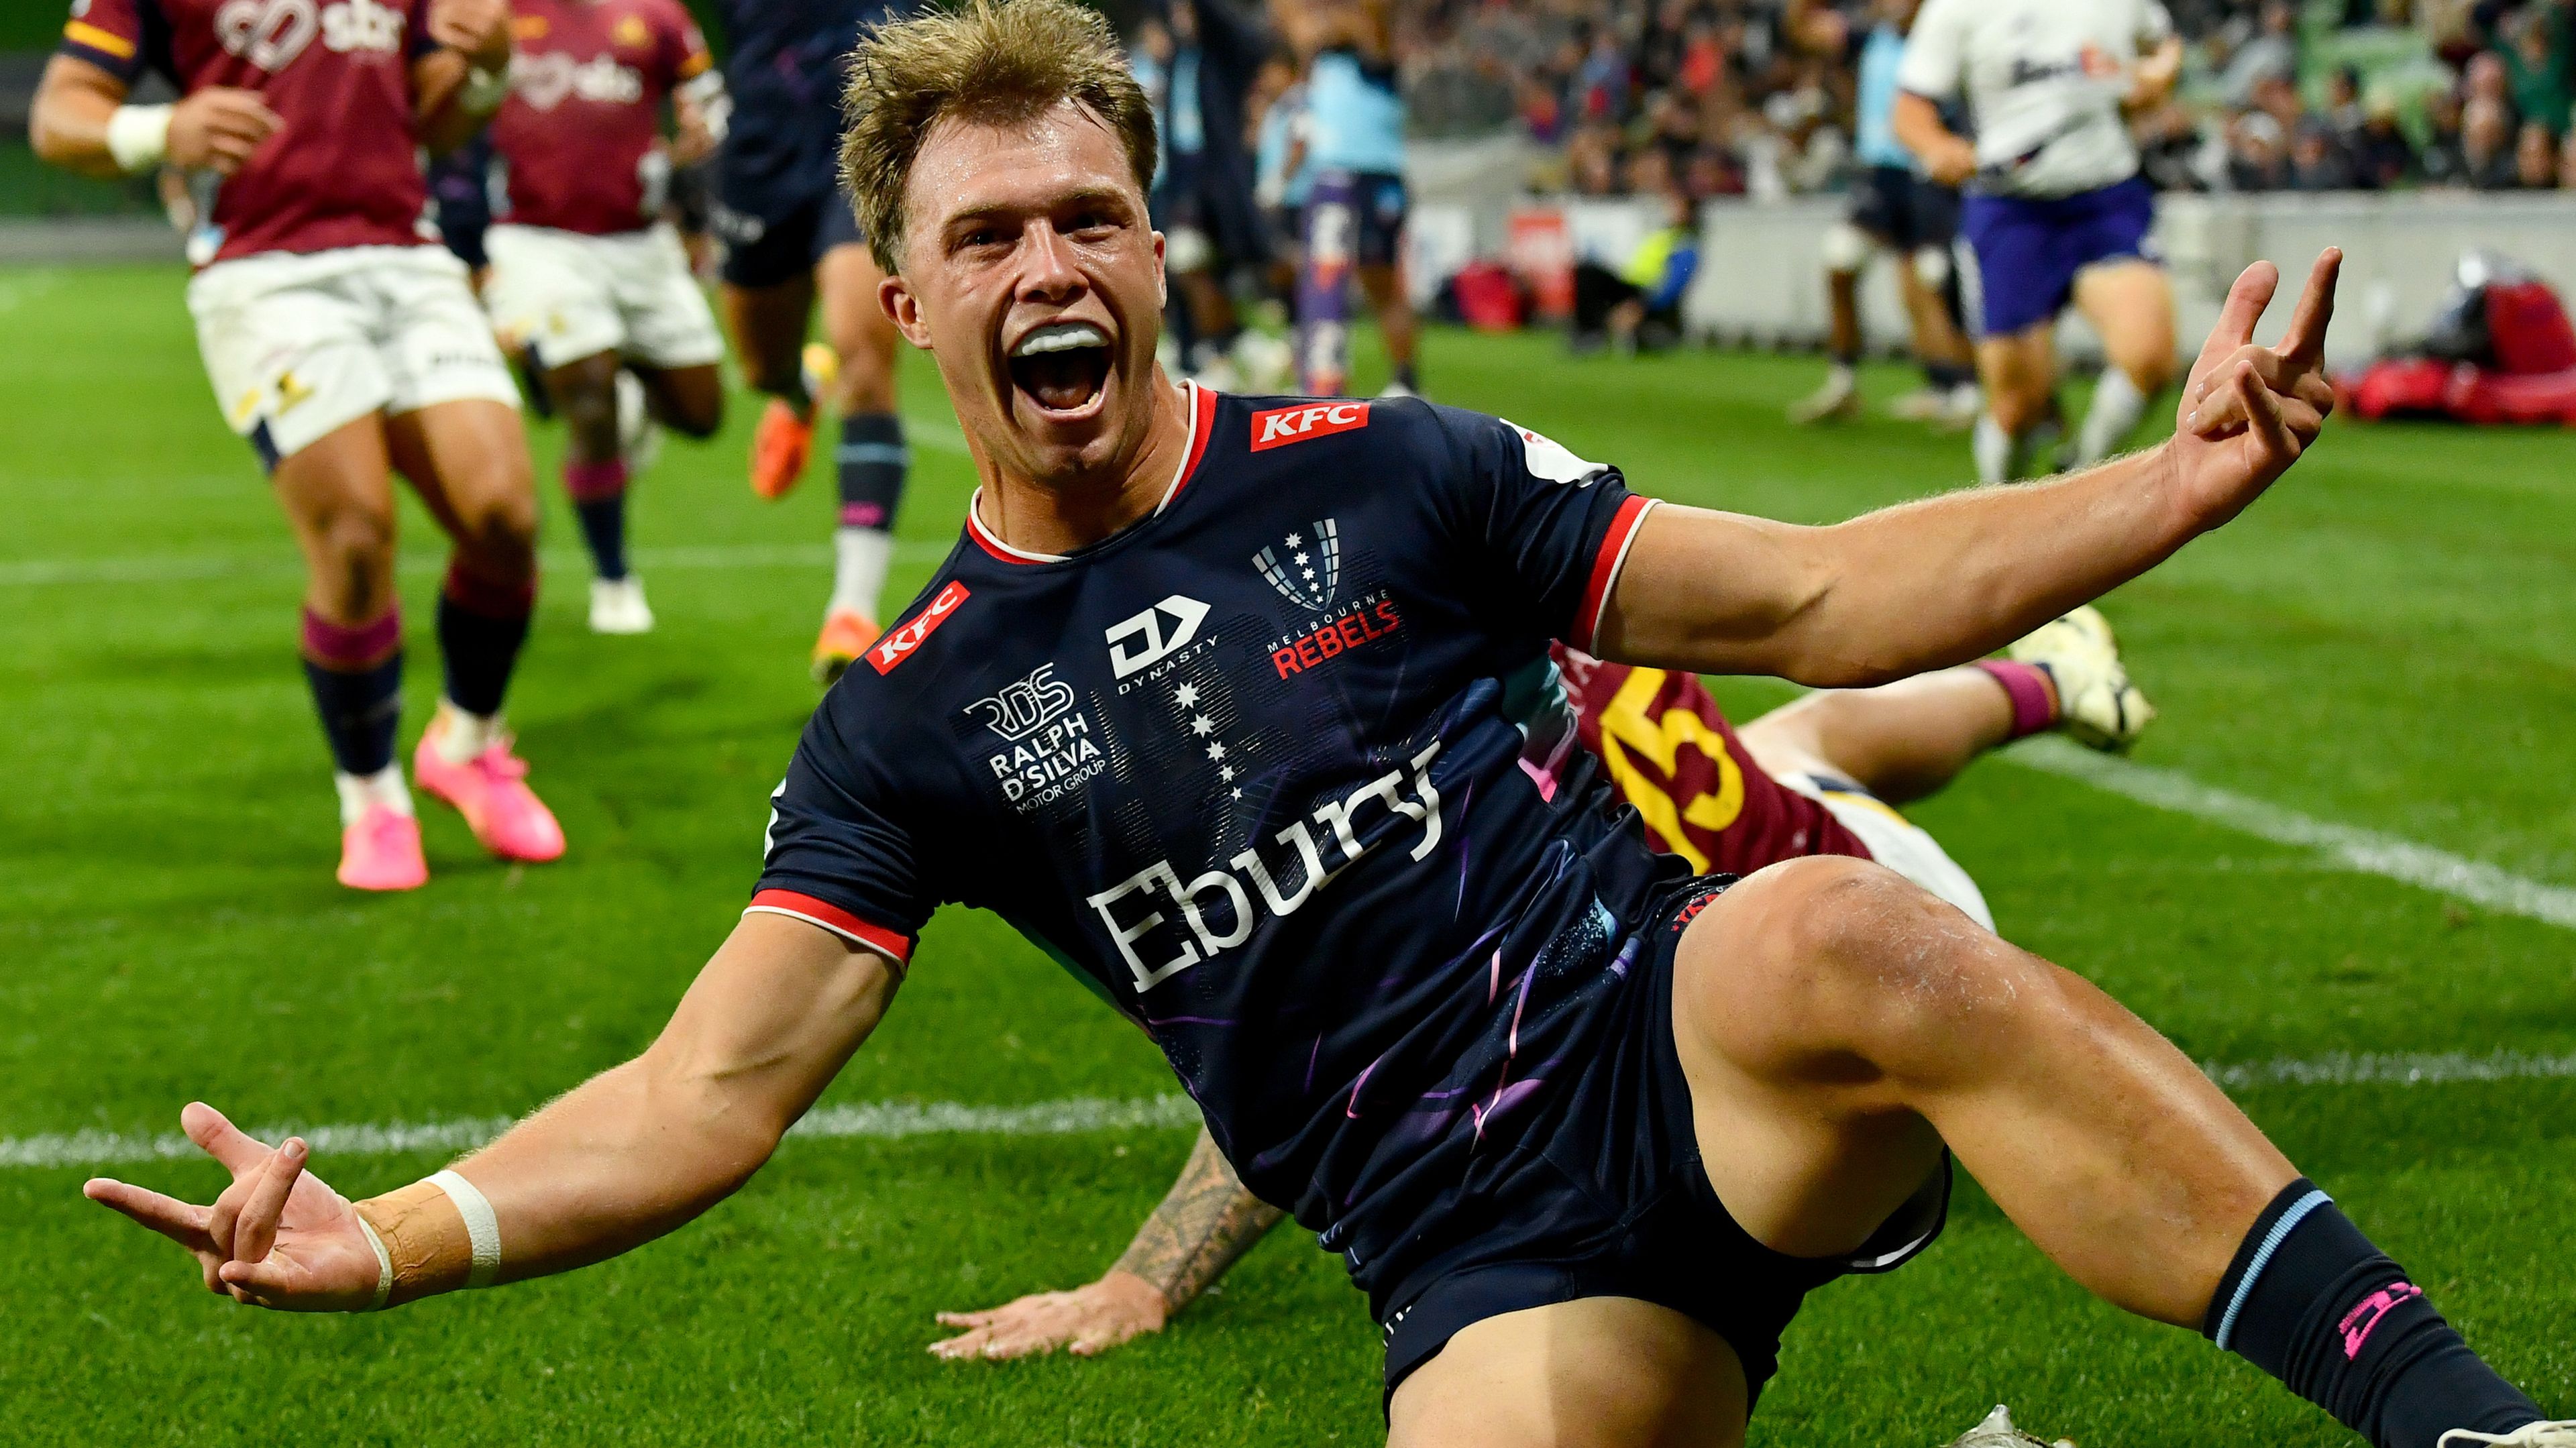 Darby Lancaster of the Rebels celebrates scoring a try.